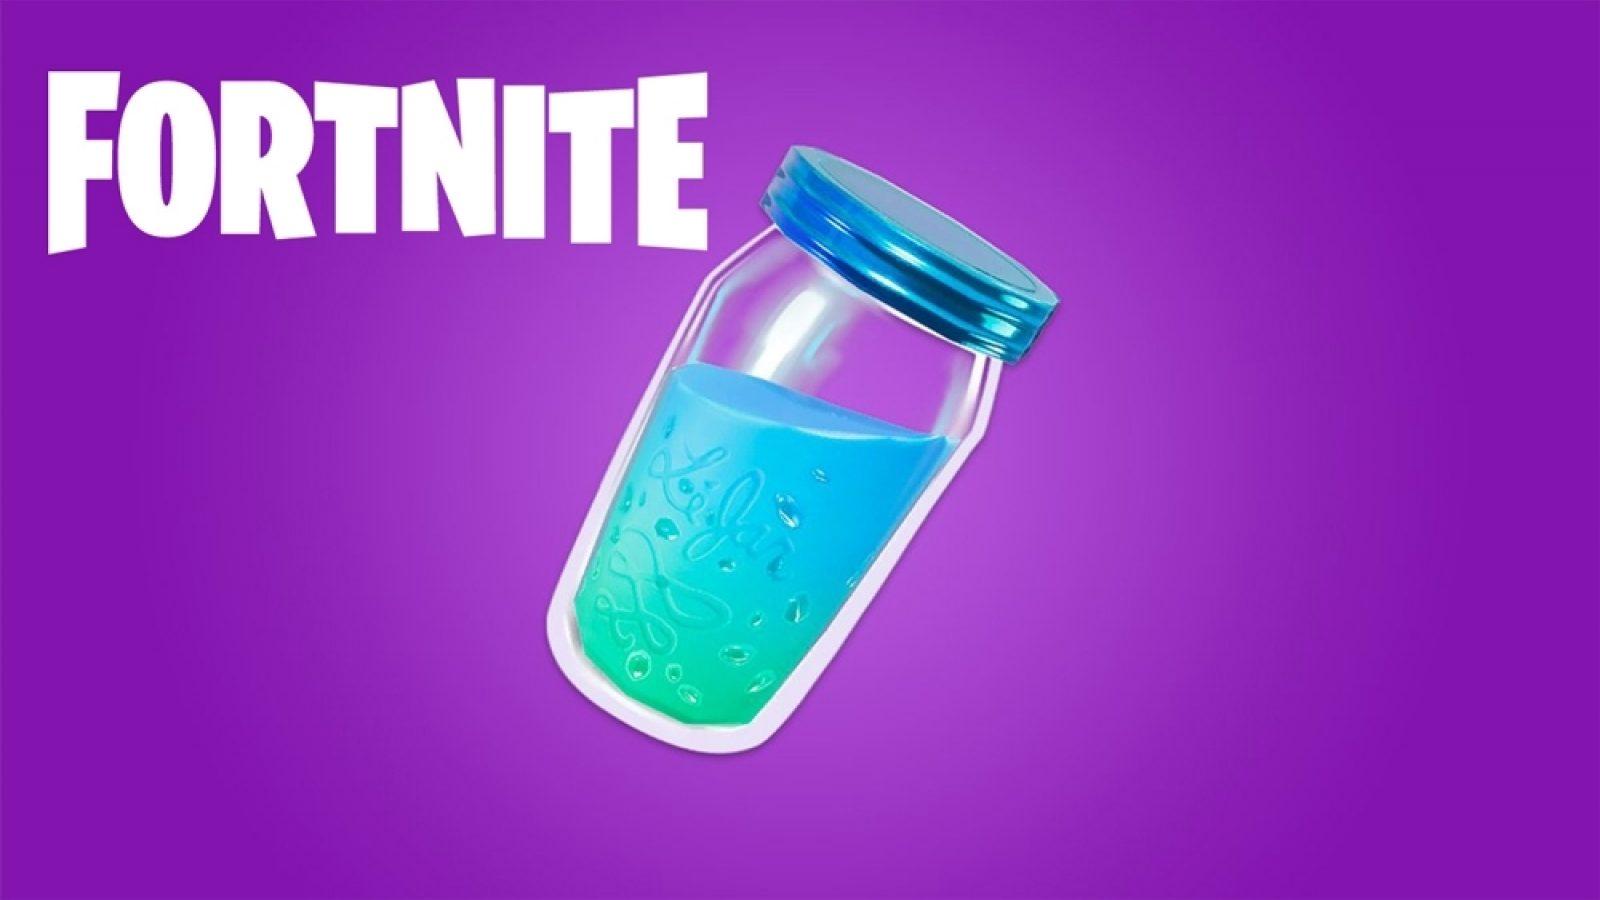 Fortnite: Dataminers have uncovered a